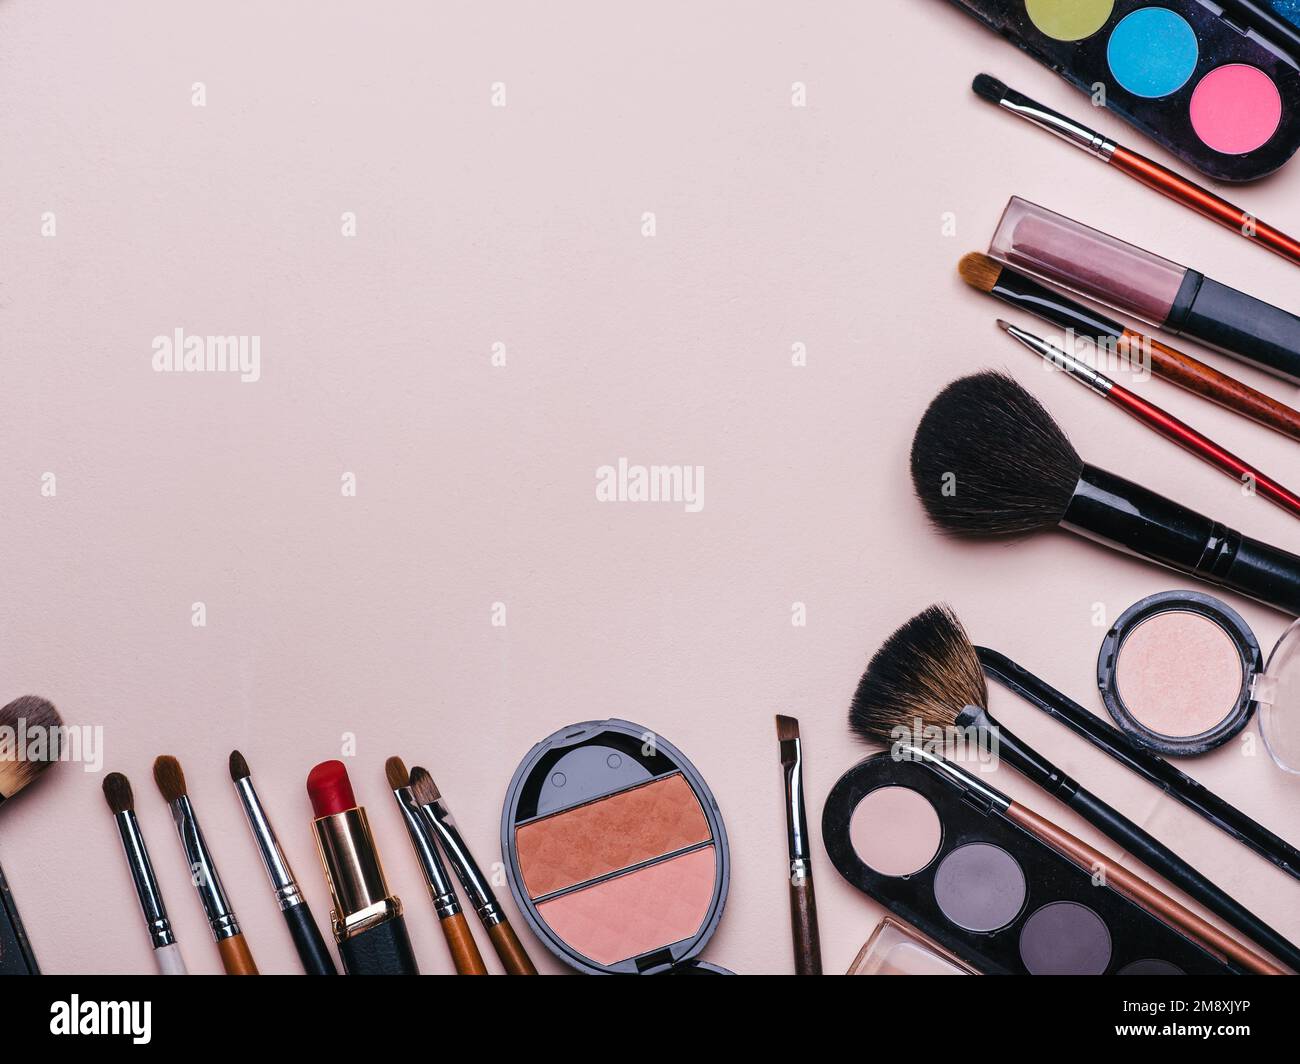 Set of professional cosmetics, makeup tools and accessories for women's beauty. Flat lay frame composition, top view. Stock Photo